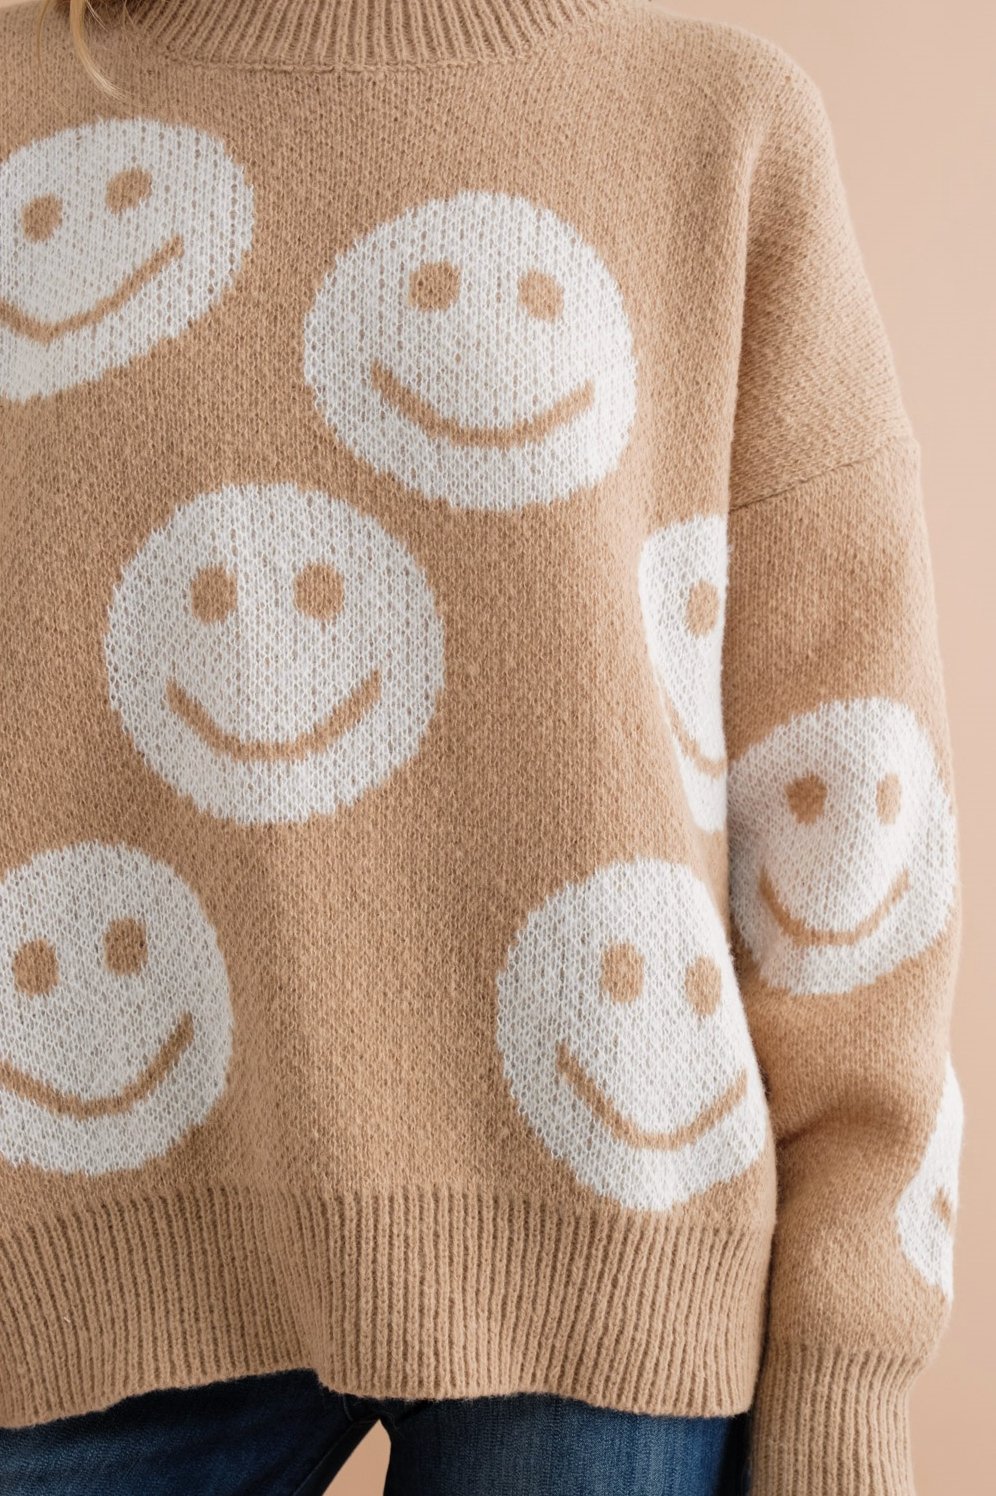 SMILE FACE PATTERN SWEATER - Tired Mama Co.